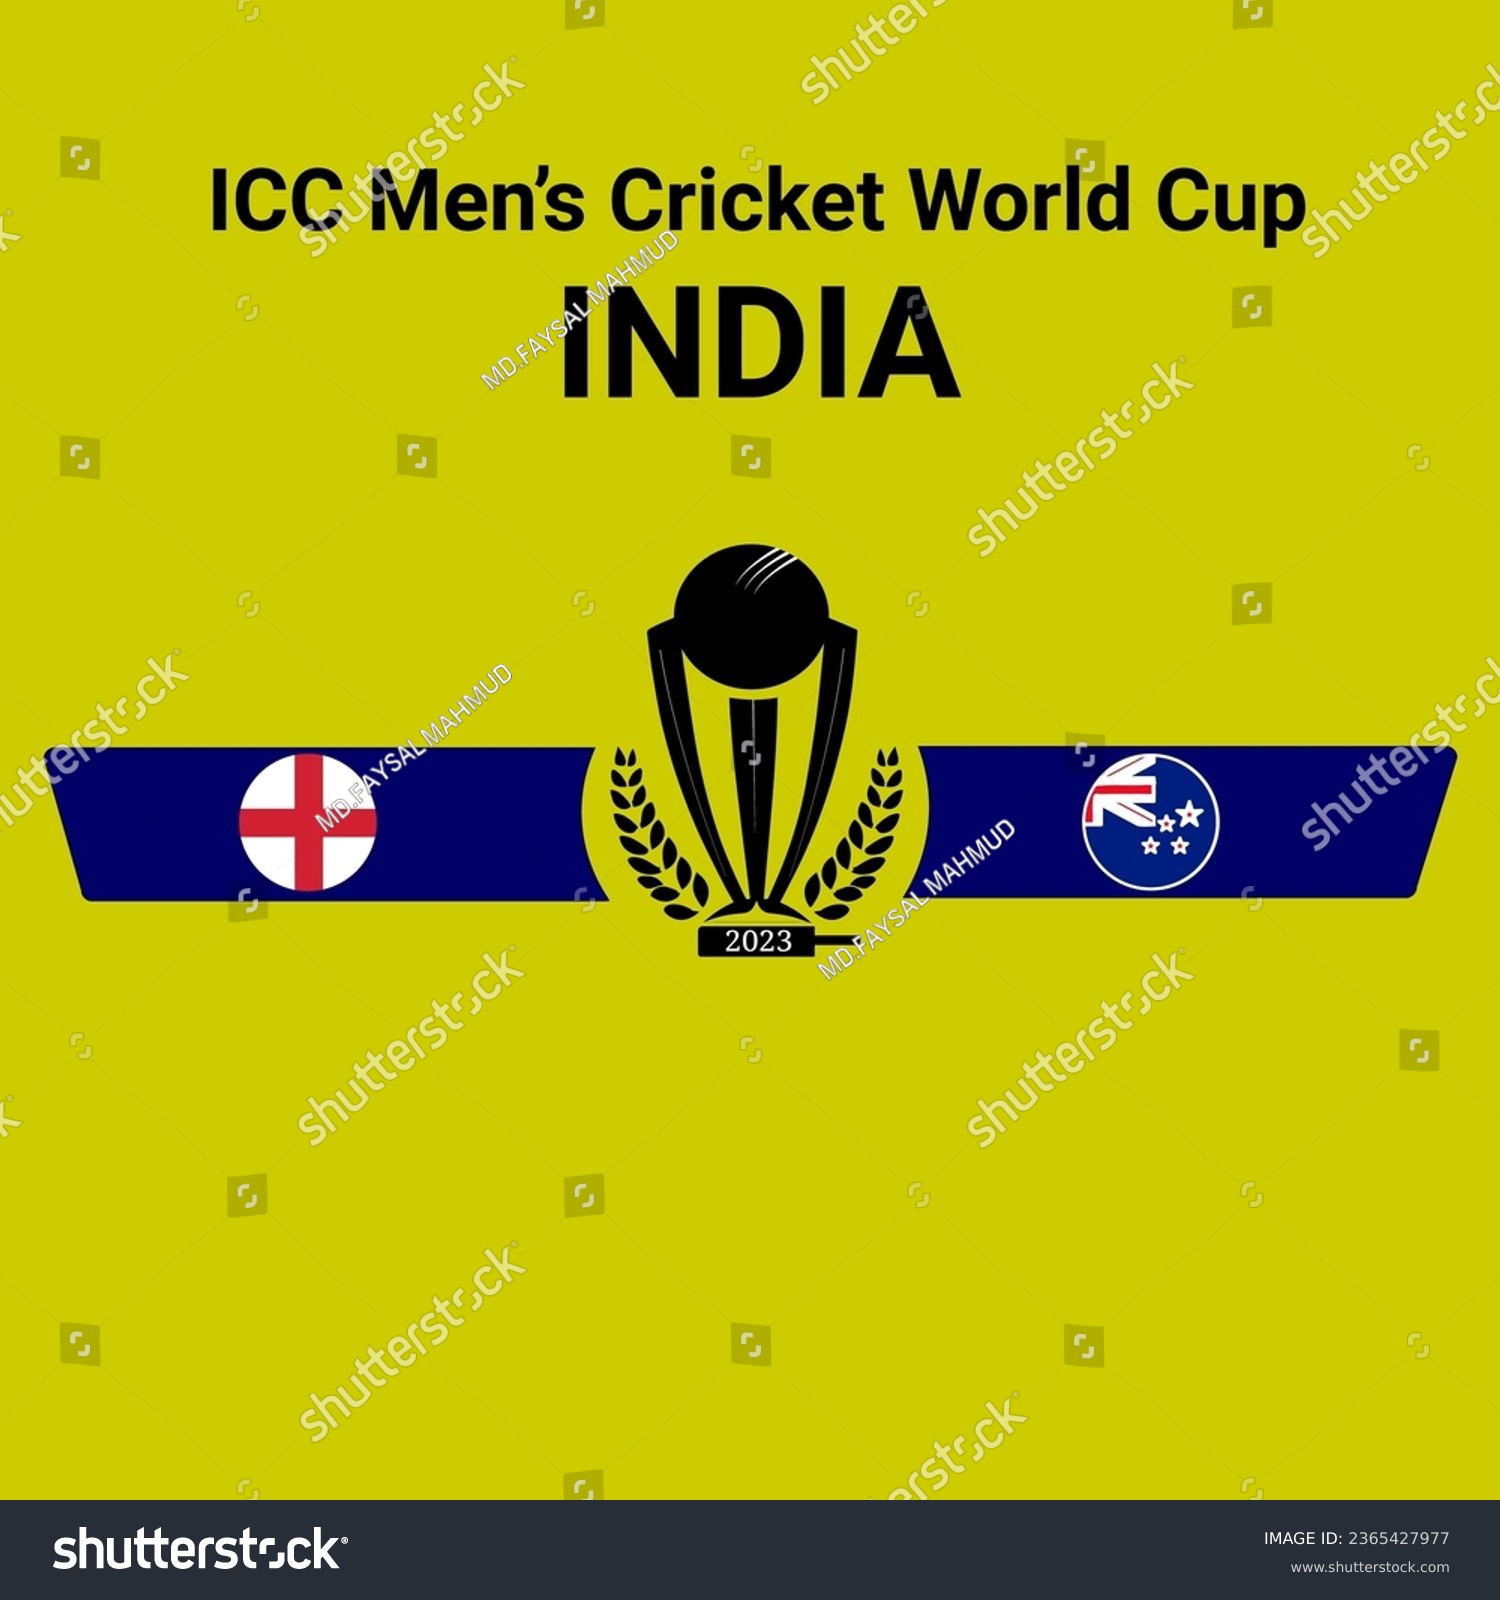 SVG of England vs New Zealand flag design with world map background for icc men’s cricket world cup 2023 tournament ,this vector for sport match template svg